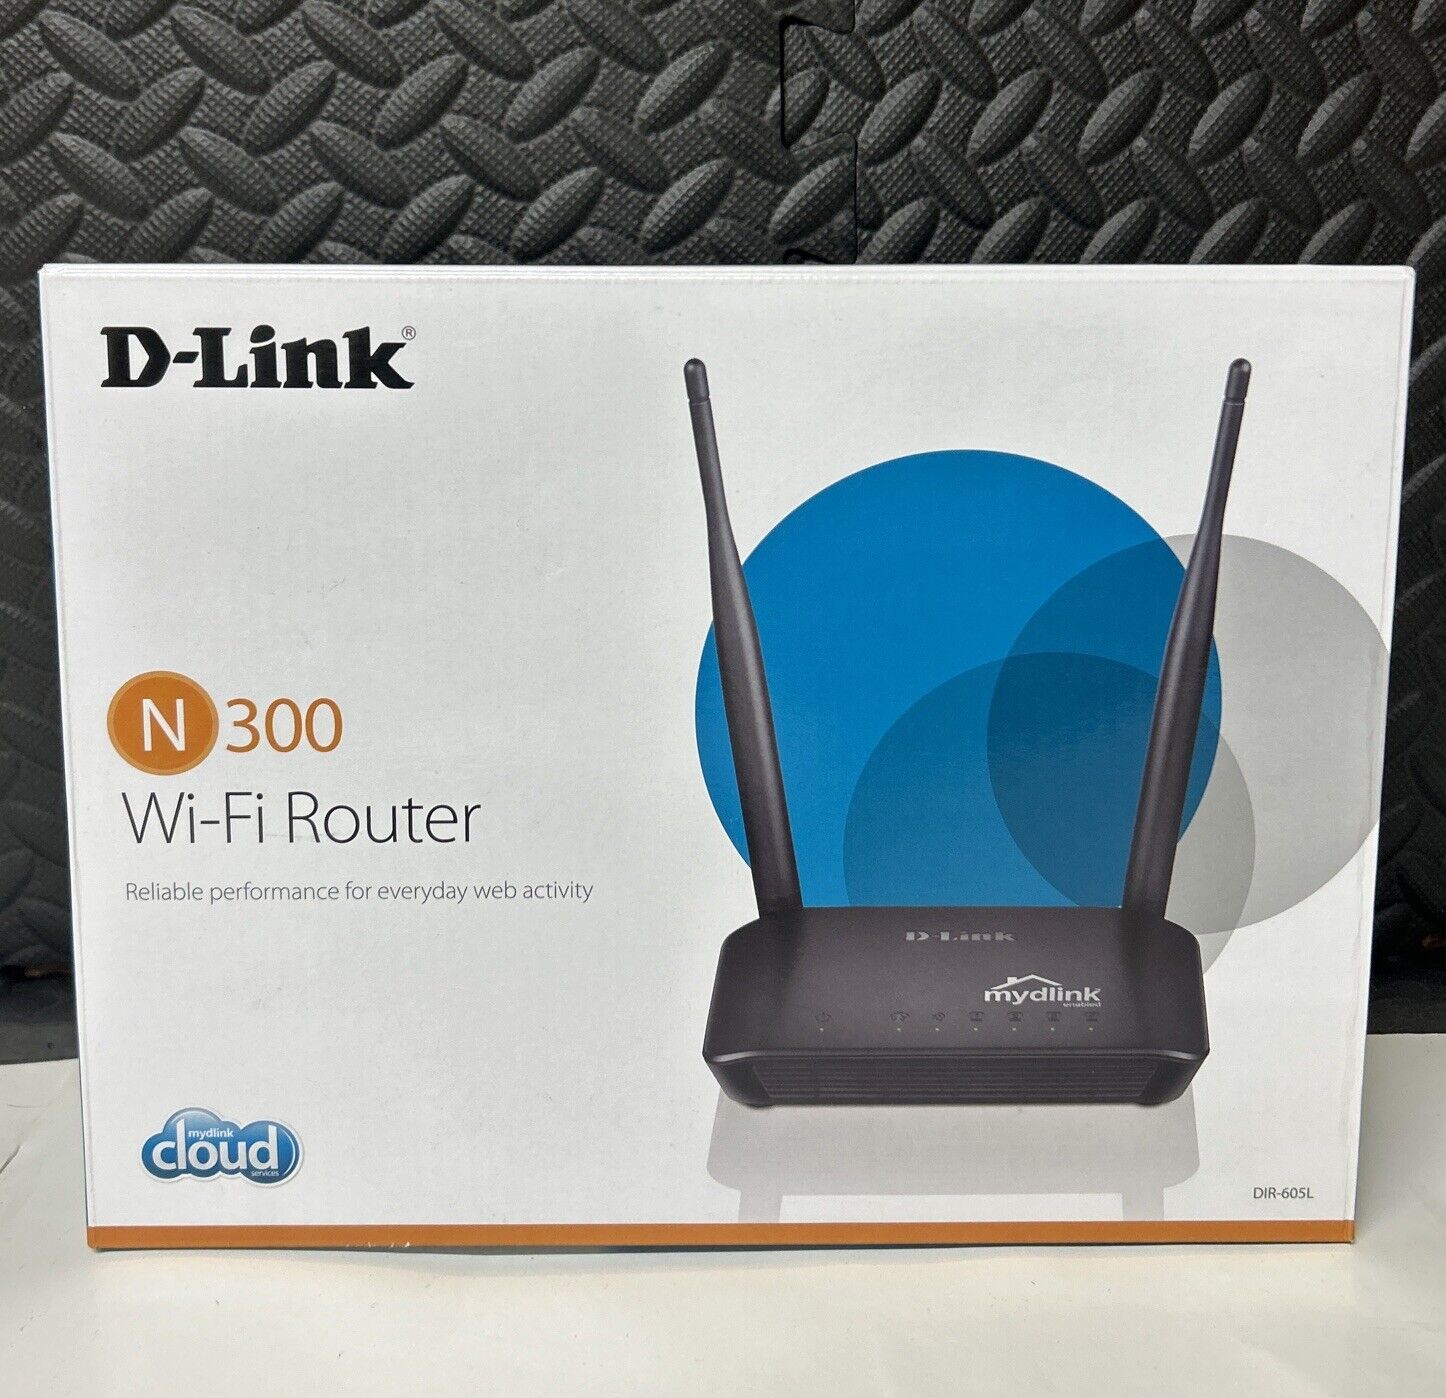 D-Link N300 Wi-Fi Router DIR-605L, 4 Ethernet Ports Antenna No Ethernet Cable.